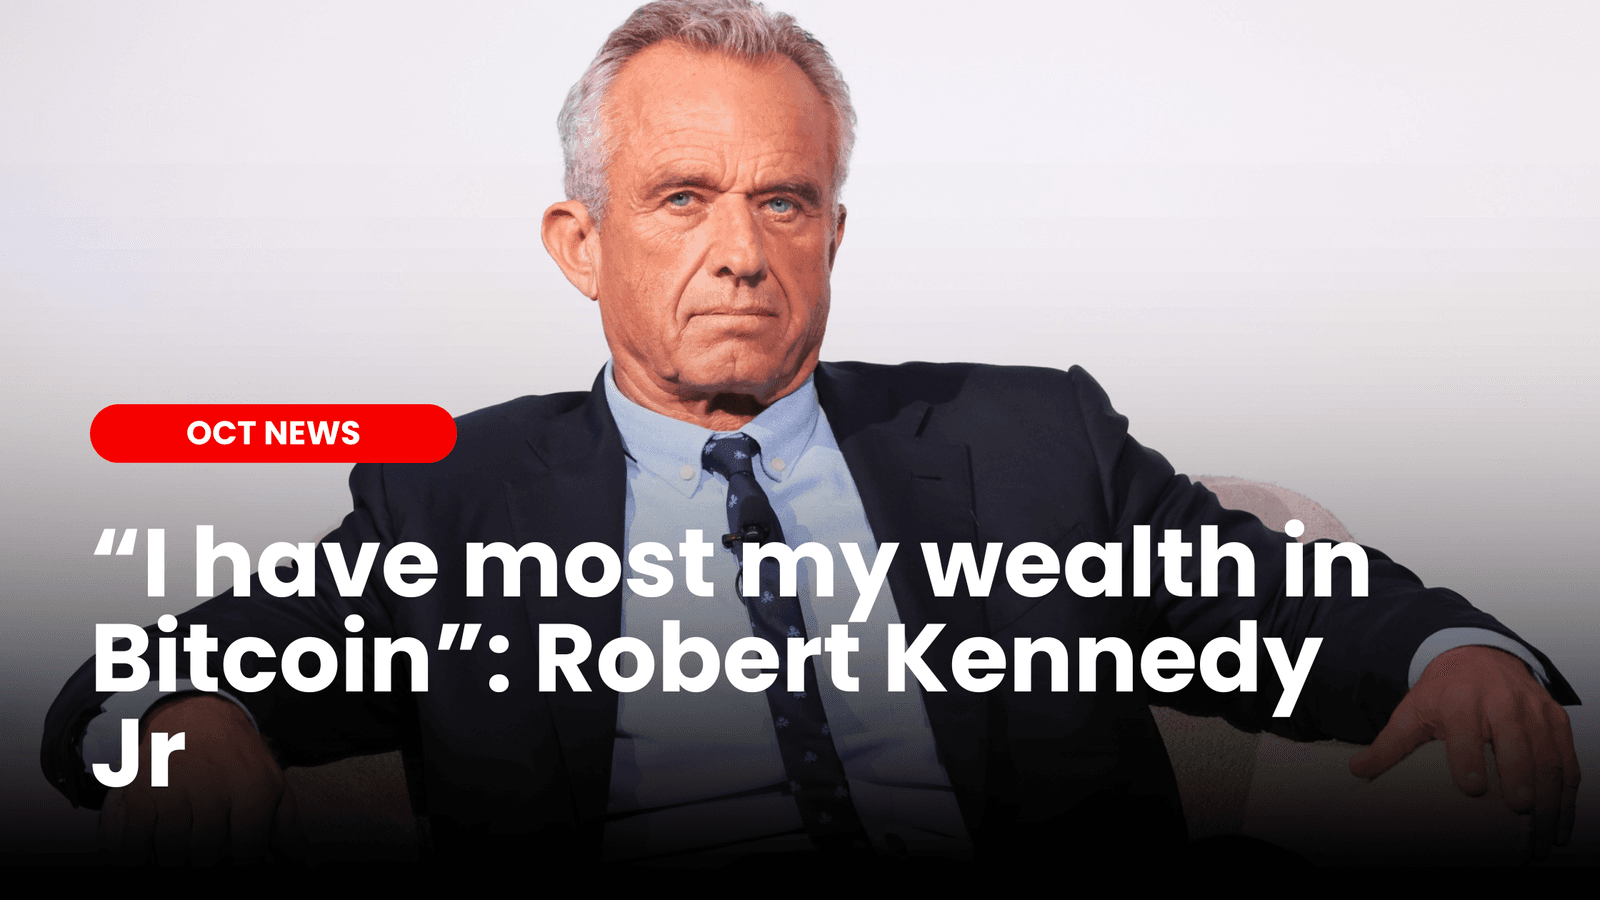 Robert Kennedy Jr. says he has most his wealth in Bitcoin image